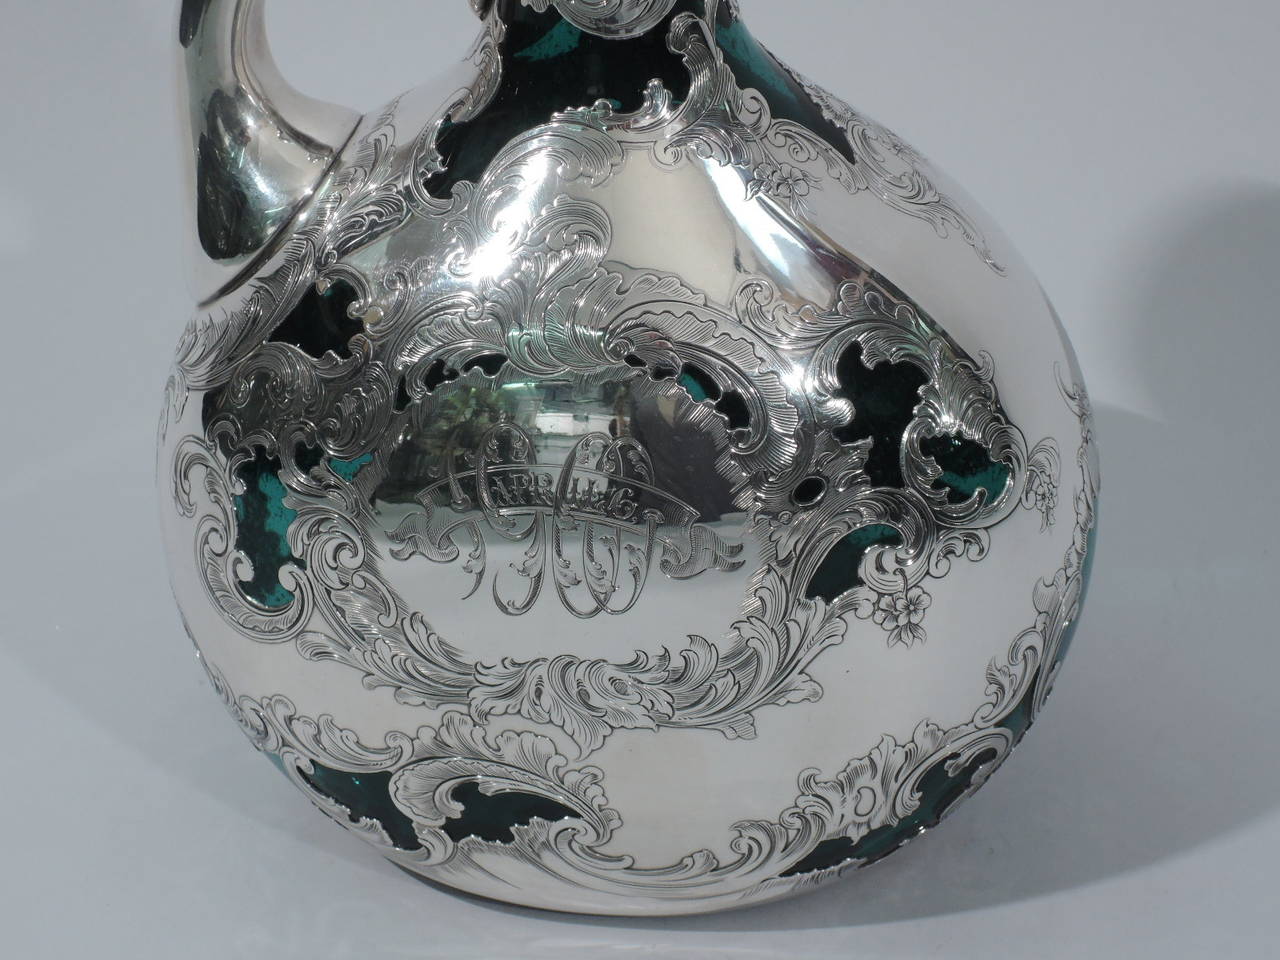 19th Century Antique Gorham Jug Decanter in Emerald Glass with Silver Overlay